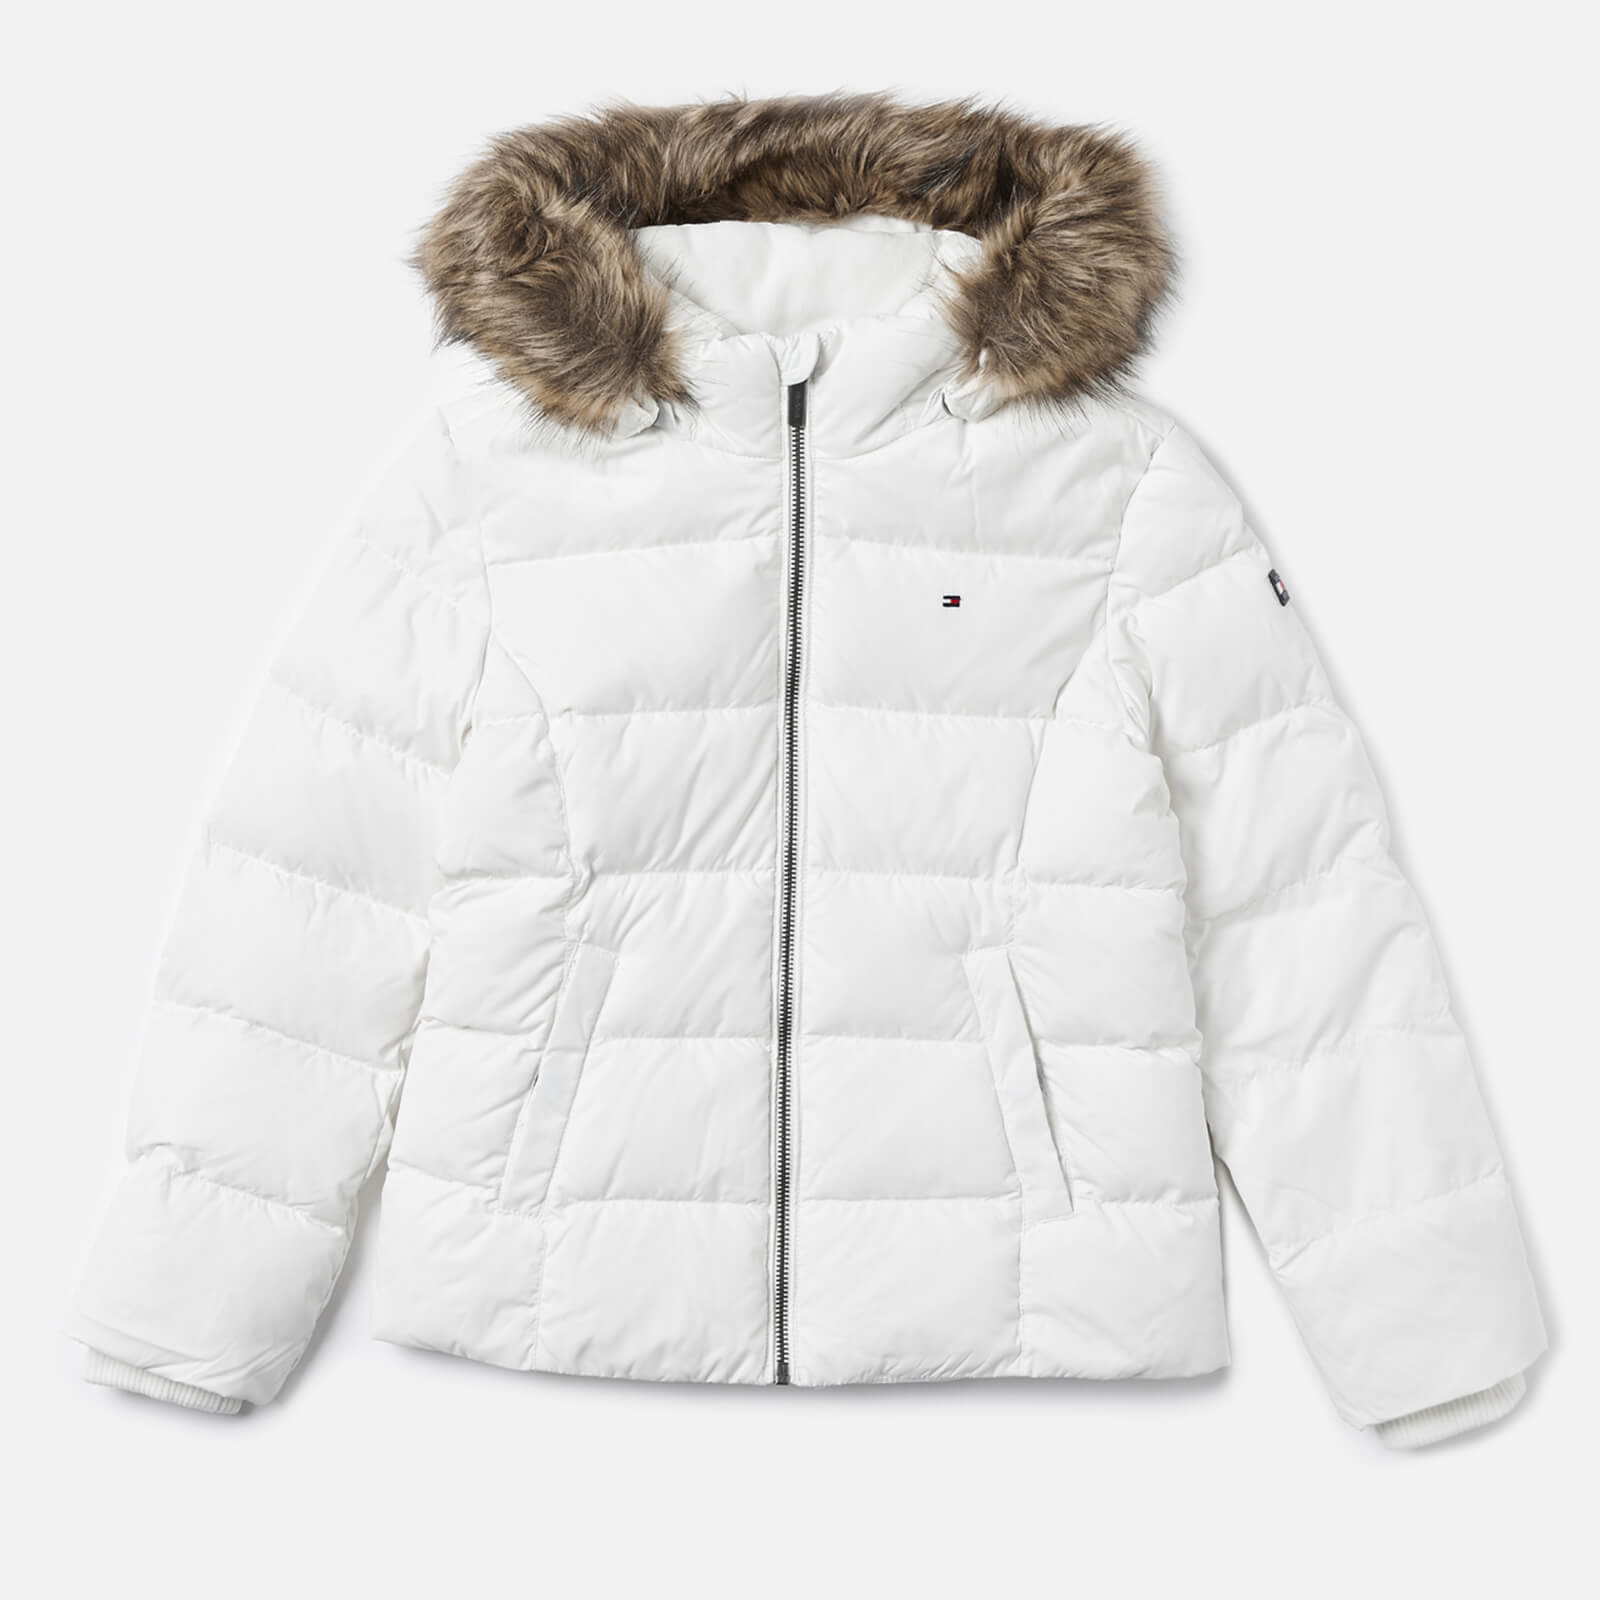 tommy snow jackets Cheaper Than Retail 